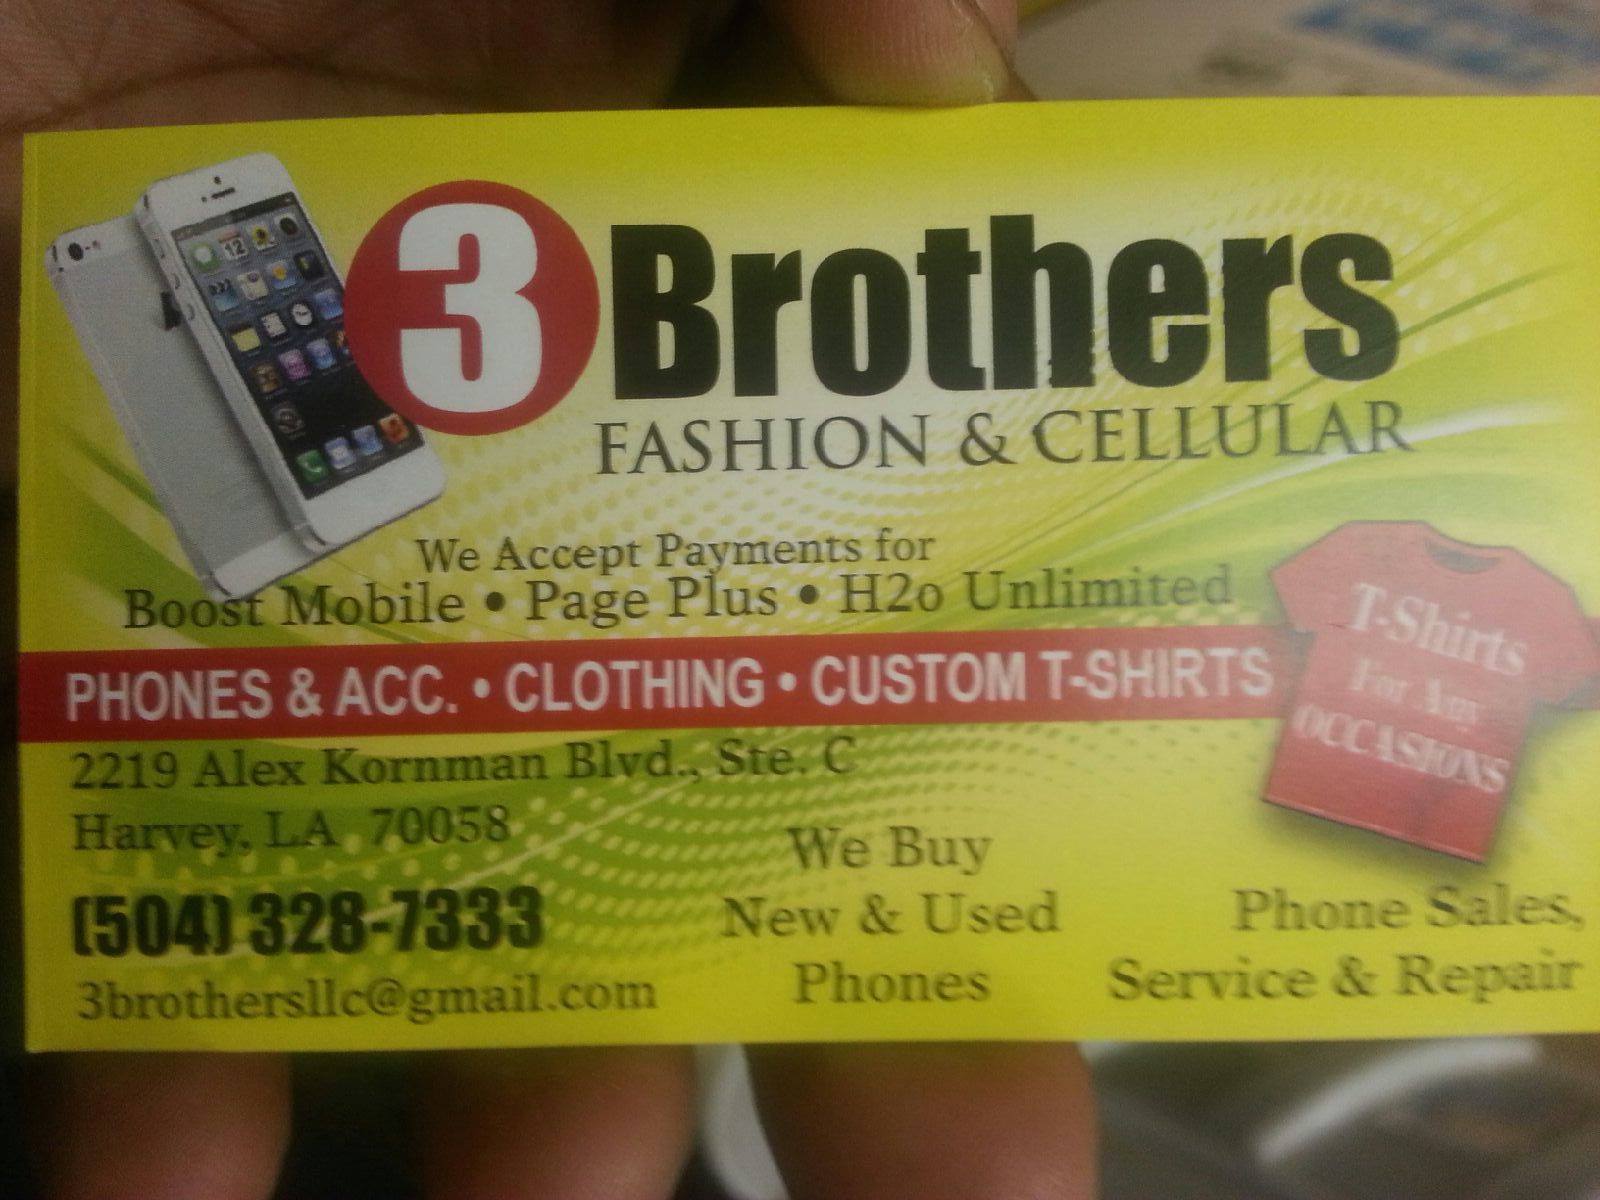 Brothers Fashion & Cellular